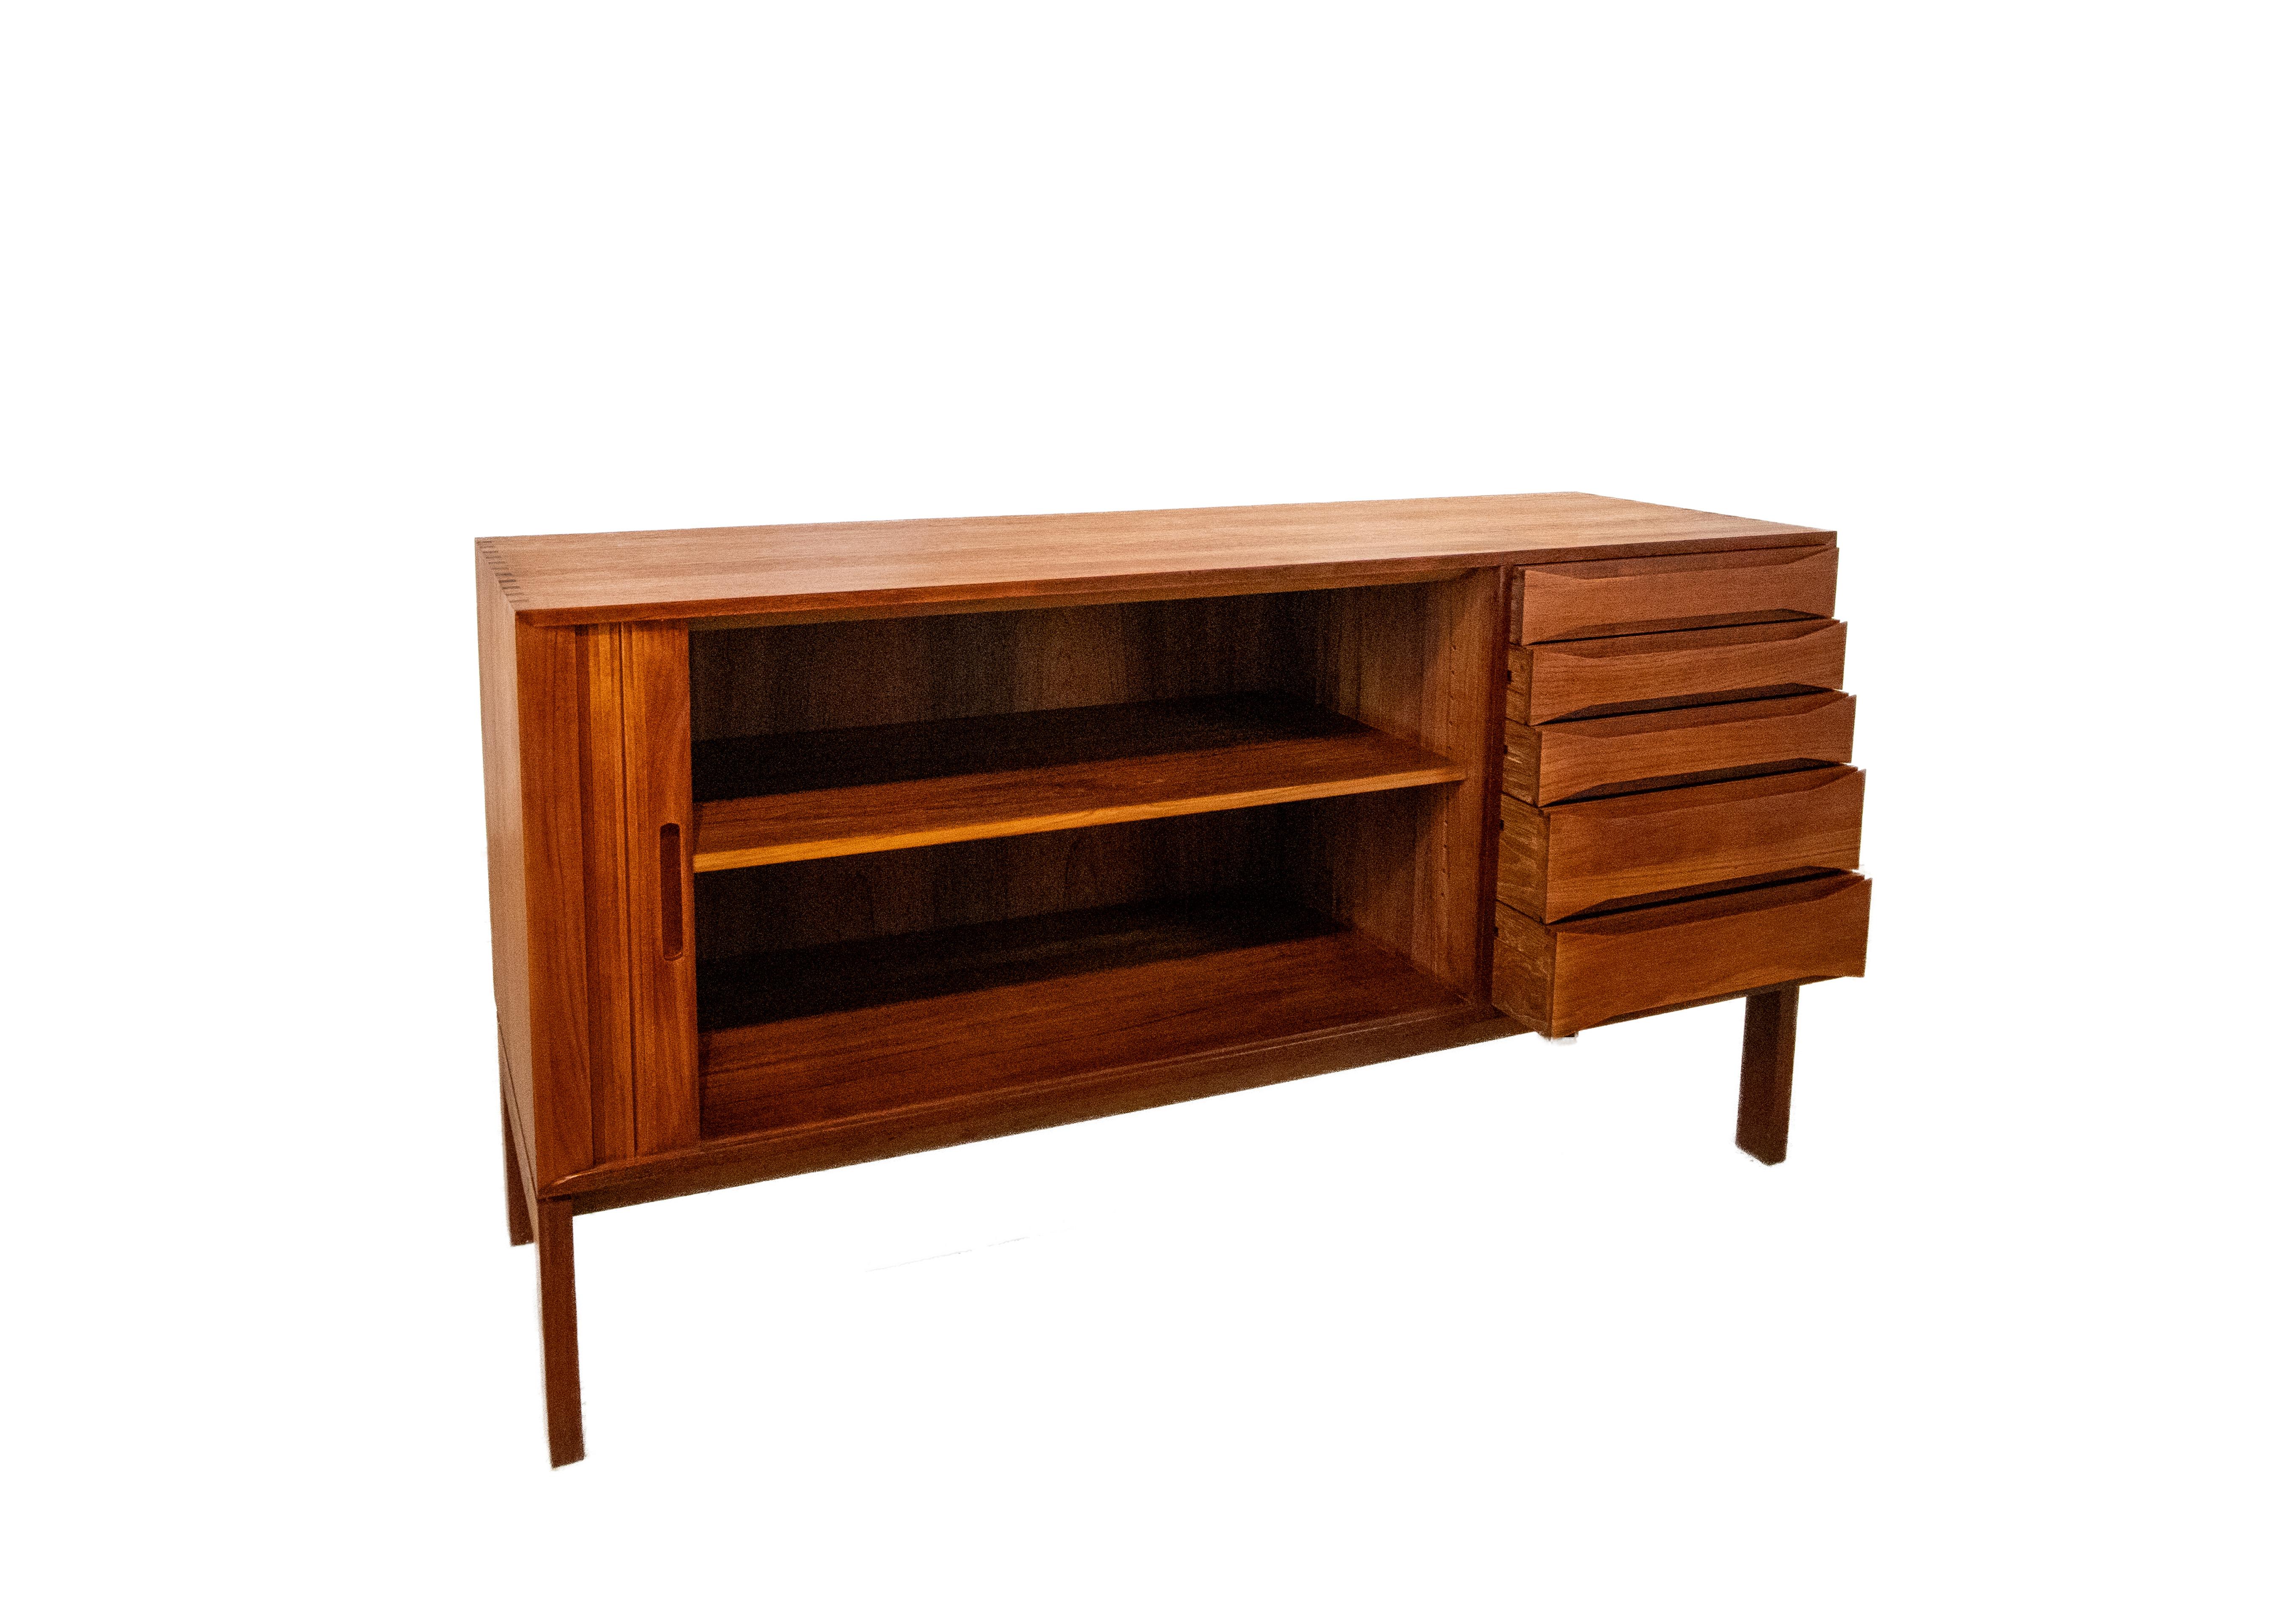 A wonderfully crafted solid teak credenza designed by Johannes Aasbjerg. A great combination of details including a thick solid teak slat sliding tambour door. The solid teak box is joined with dovetail joints similar to cabinets from Peter Hvidt